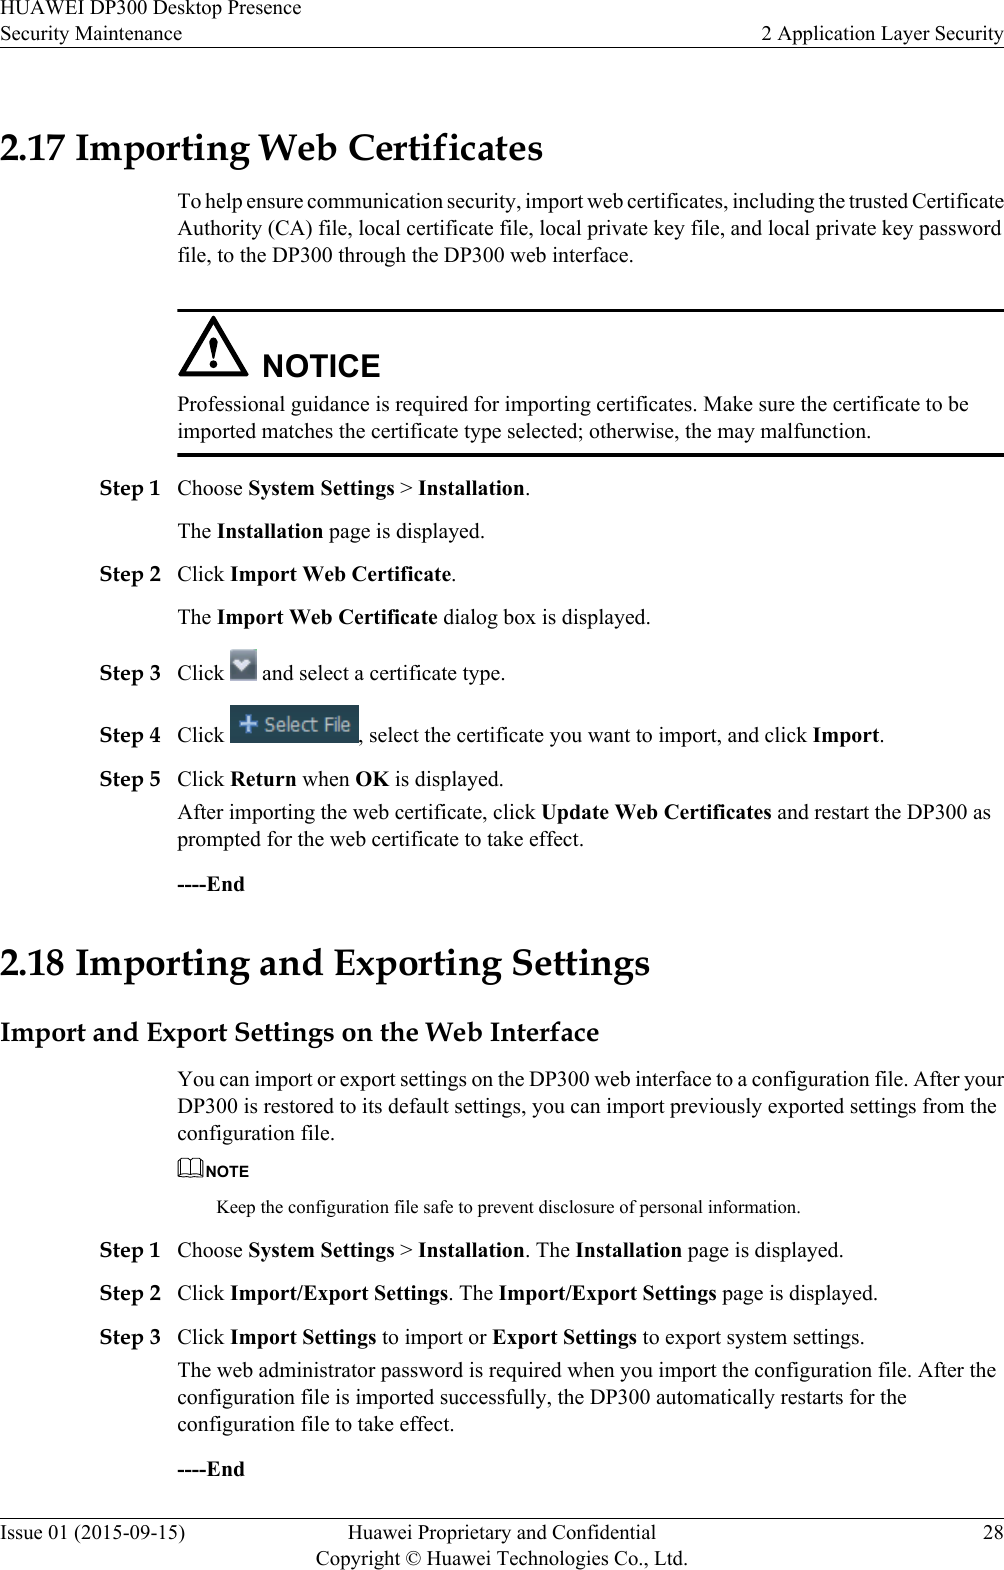 2.17 Importing Web CertificatesTo help ensure communication security, import web certificates, including the trusted CertificateAuthority (CA) file, local certificate file, local private key file, and local private key passwordfile, to the DP300 through the DP300 web interface.NOTICEProfessional guidance is required for importing certificates. Make sure the certificate to beimported matches the certificate type selected; otherwise, the may malfunction.Step 1 Choose System Settings &gt; Installation.The Installation page is displayed.Step 2 Click Import Web Certificate.The Import Web Certificate dialog box is displayed.Step 3 Click   and select a certificate type.Step 4 Click  , select the certificate you want to import, and click Import.Step 5 Click Return when OK is displayed.After importing the web certificate, click Update Web Certificates and restart the DP300 asprompted for the web certificate to take effect.----End2.18 Importing and Exporting SettingsImport and Export Settings on the Web InterfaceYou can import or export settings on the DP300 web interface to a configuration file. After yourDP300 is restored to its default settings, you can import previously exported settings from theconfiguration file.NOTEKeep the configuration file safe to prevent disclosure of personal information.Step 1 Choose System Settings &gt; Installation. The Installation page is displayed.Step 2 Click Import/Export Settings. The Import/Export Settings page is displayed.Step 3 Click Import Settings to import or Export Settings to export system settings.The web administrator password is required when you import the configuration file. After theconfiguration file is imported successfully, the DP300 automatically restarts for theconfiguration file to take effect.----EndHUAWEI DP300 Desktop PresenceSecurity Maintenance 2 Application Layer SecurityIssue 01 (2015-09-15) Huawei Proprietary and ConfidentialCopyright © Huawei Technologies Co., Ltd.28